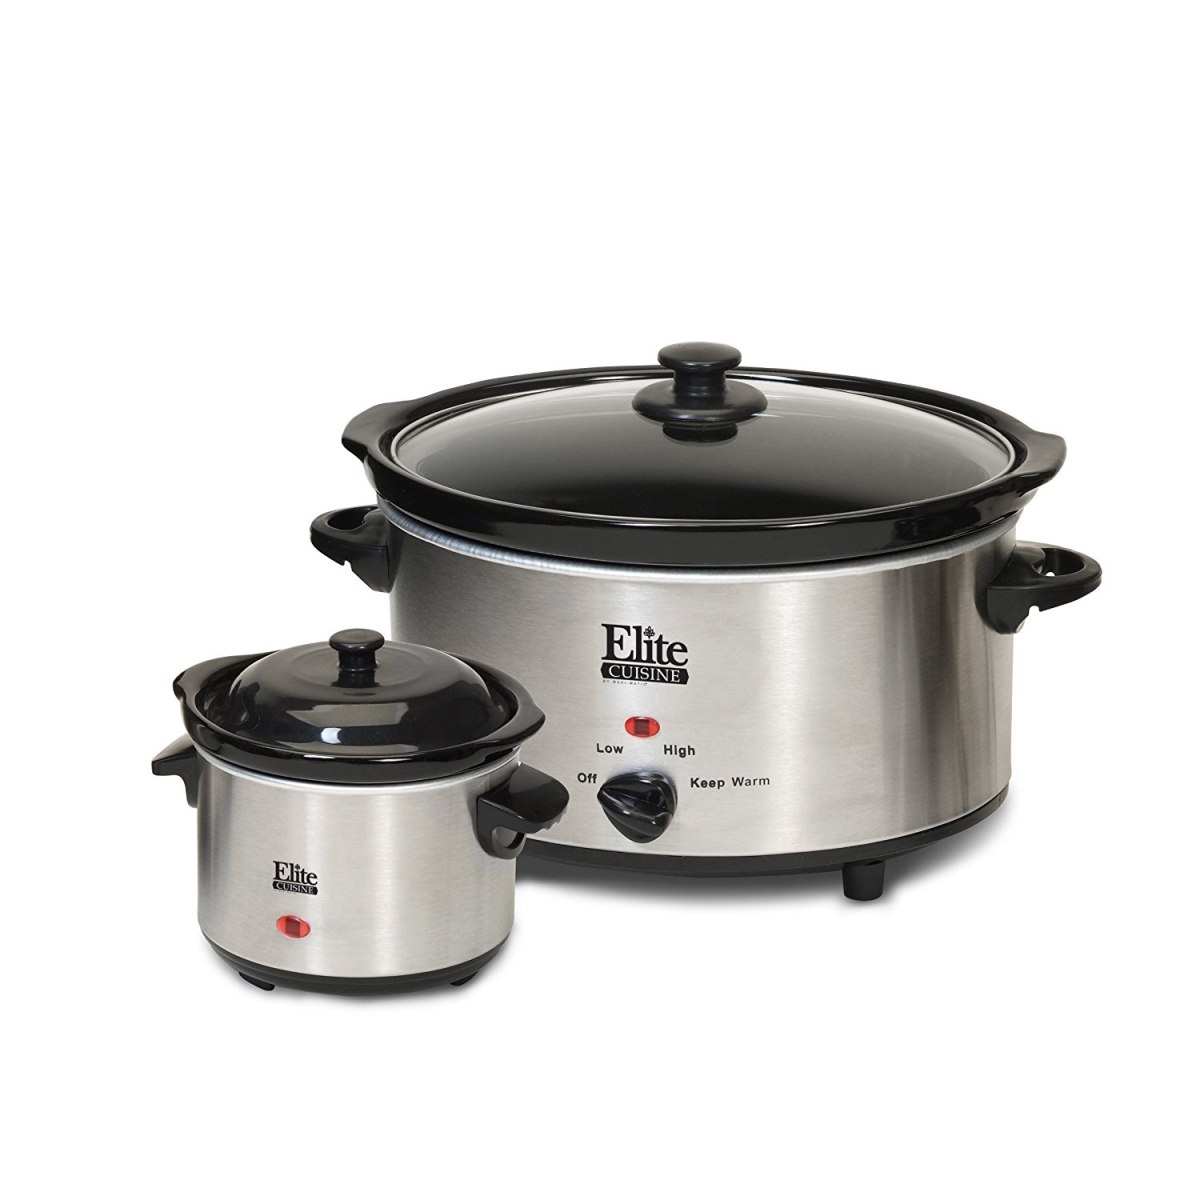 Mst500d 5 Qt. Maximatic Slow Cooker With Dipper, Stainless Steel